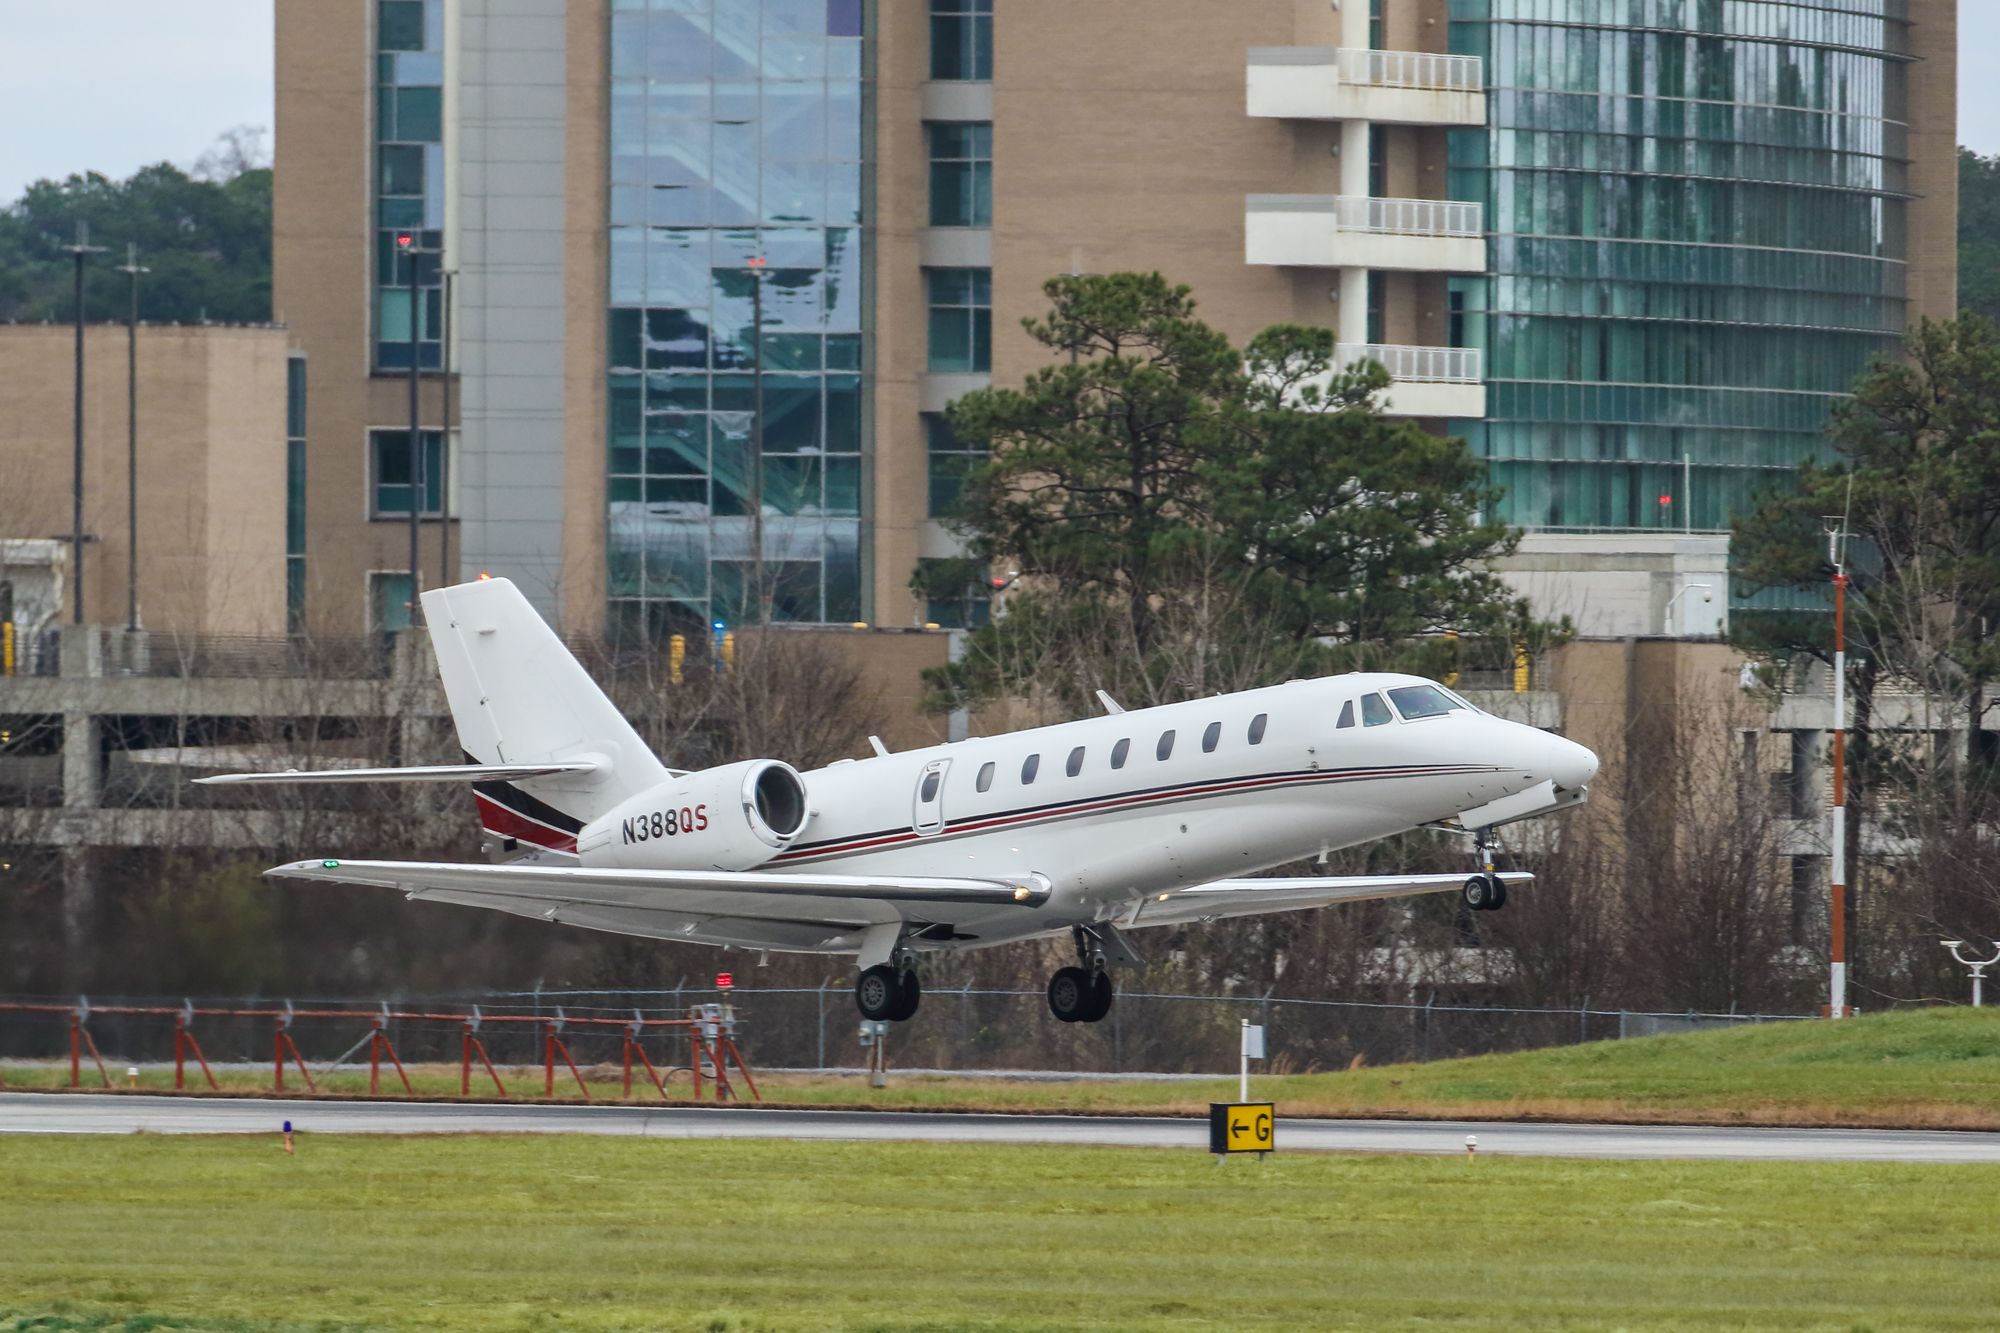 Cessna Citation Sovereign (N388QS) - This is a photo of a Cessna 680 departing Atlanta's PDK executive airport. I shot this with a Canon 100-400 IS II lens. The camera and lens settings were 312mm, 1/2000 shutter, F5.6 ISO 320. I really appreciate POSITIVE VOTES & POSITIVE COMMENTS. Please check out my other aircraft photography. Questions about this photo can be sent to Info@FlewShots.com